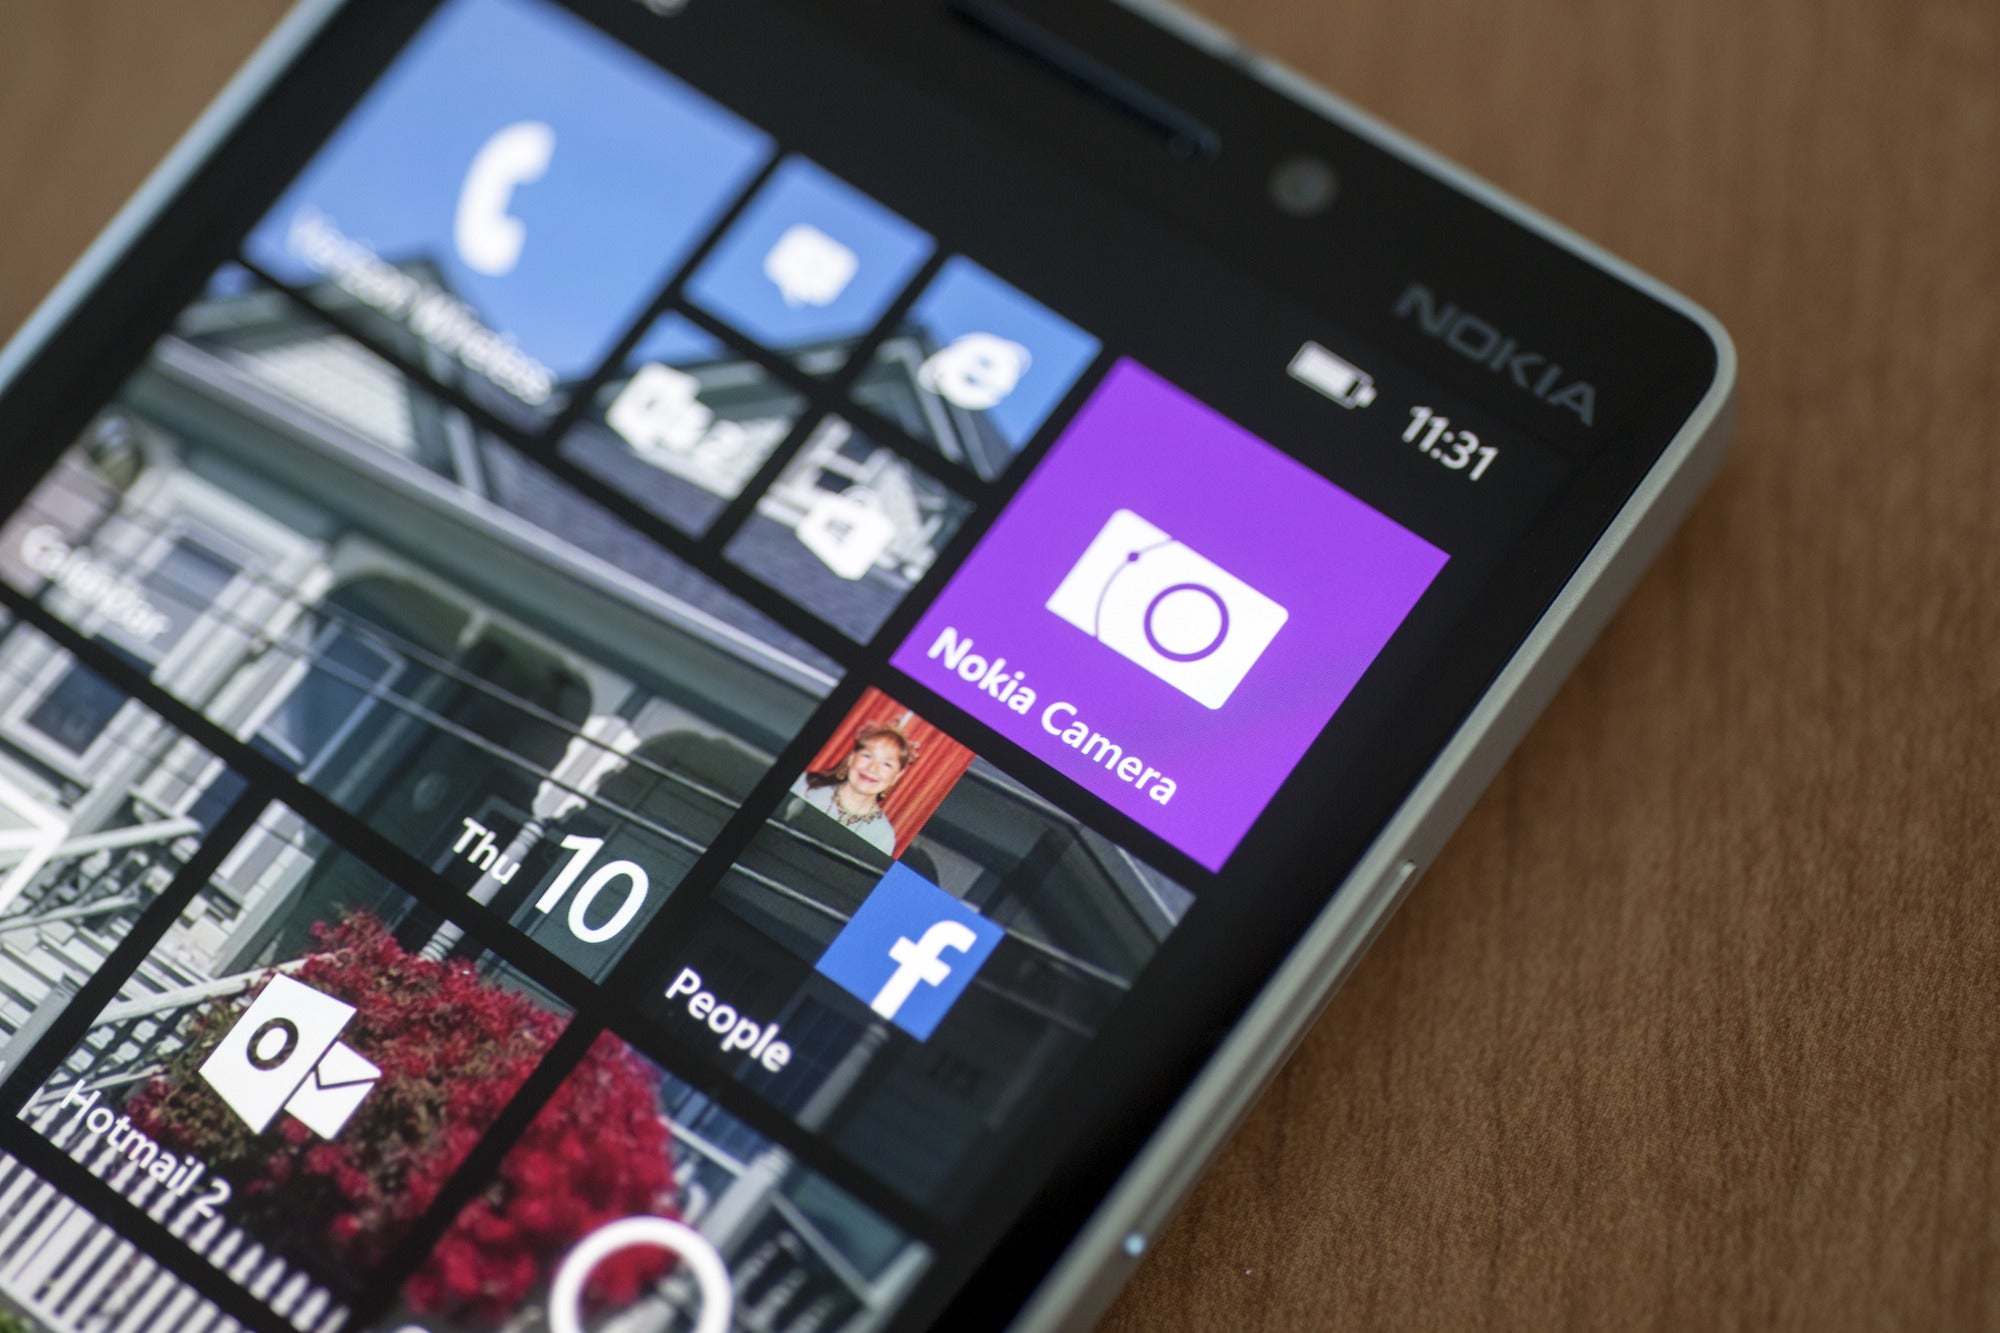 Windows Phone 8.1: Release Date, Rumors, News, Features, And More